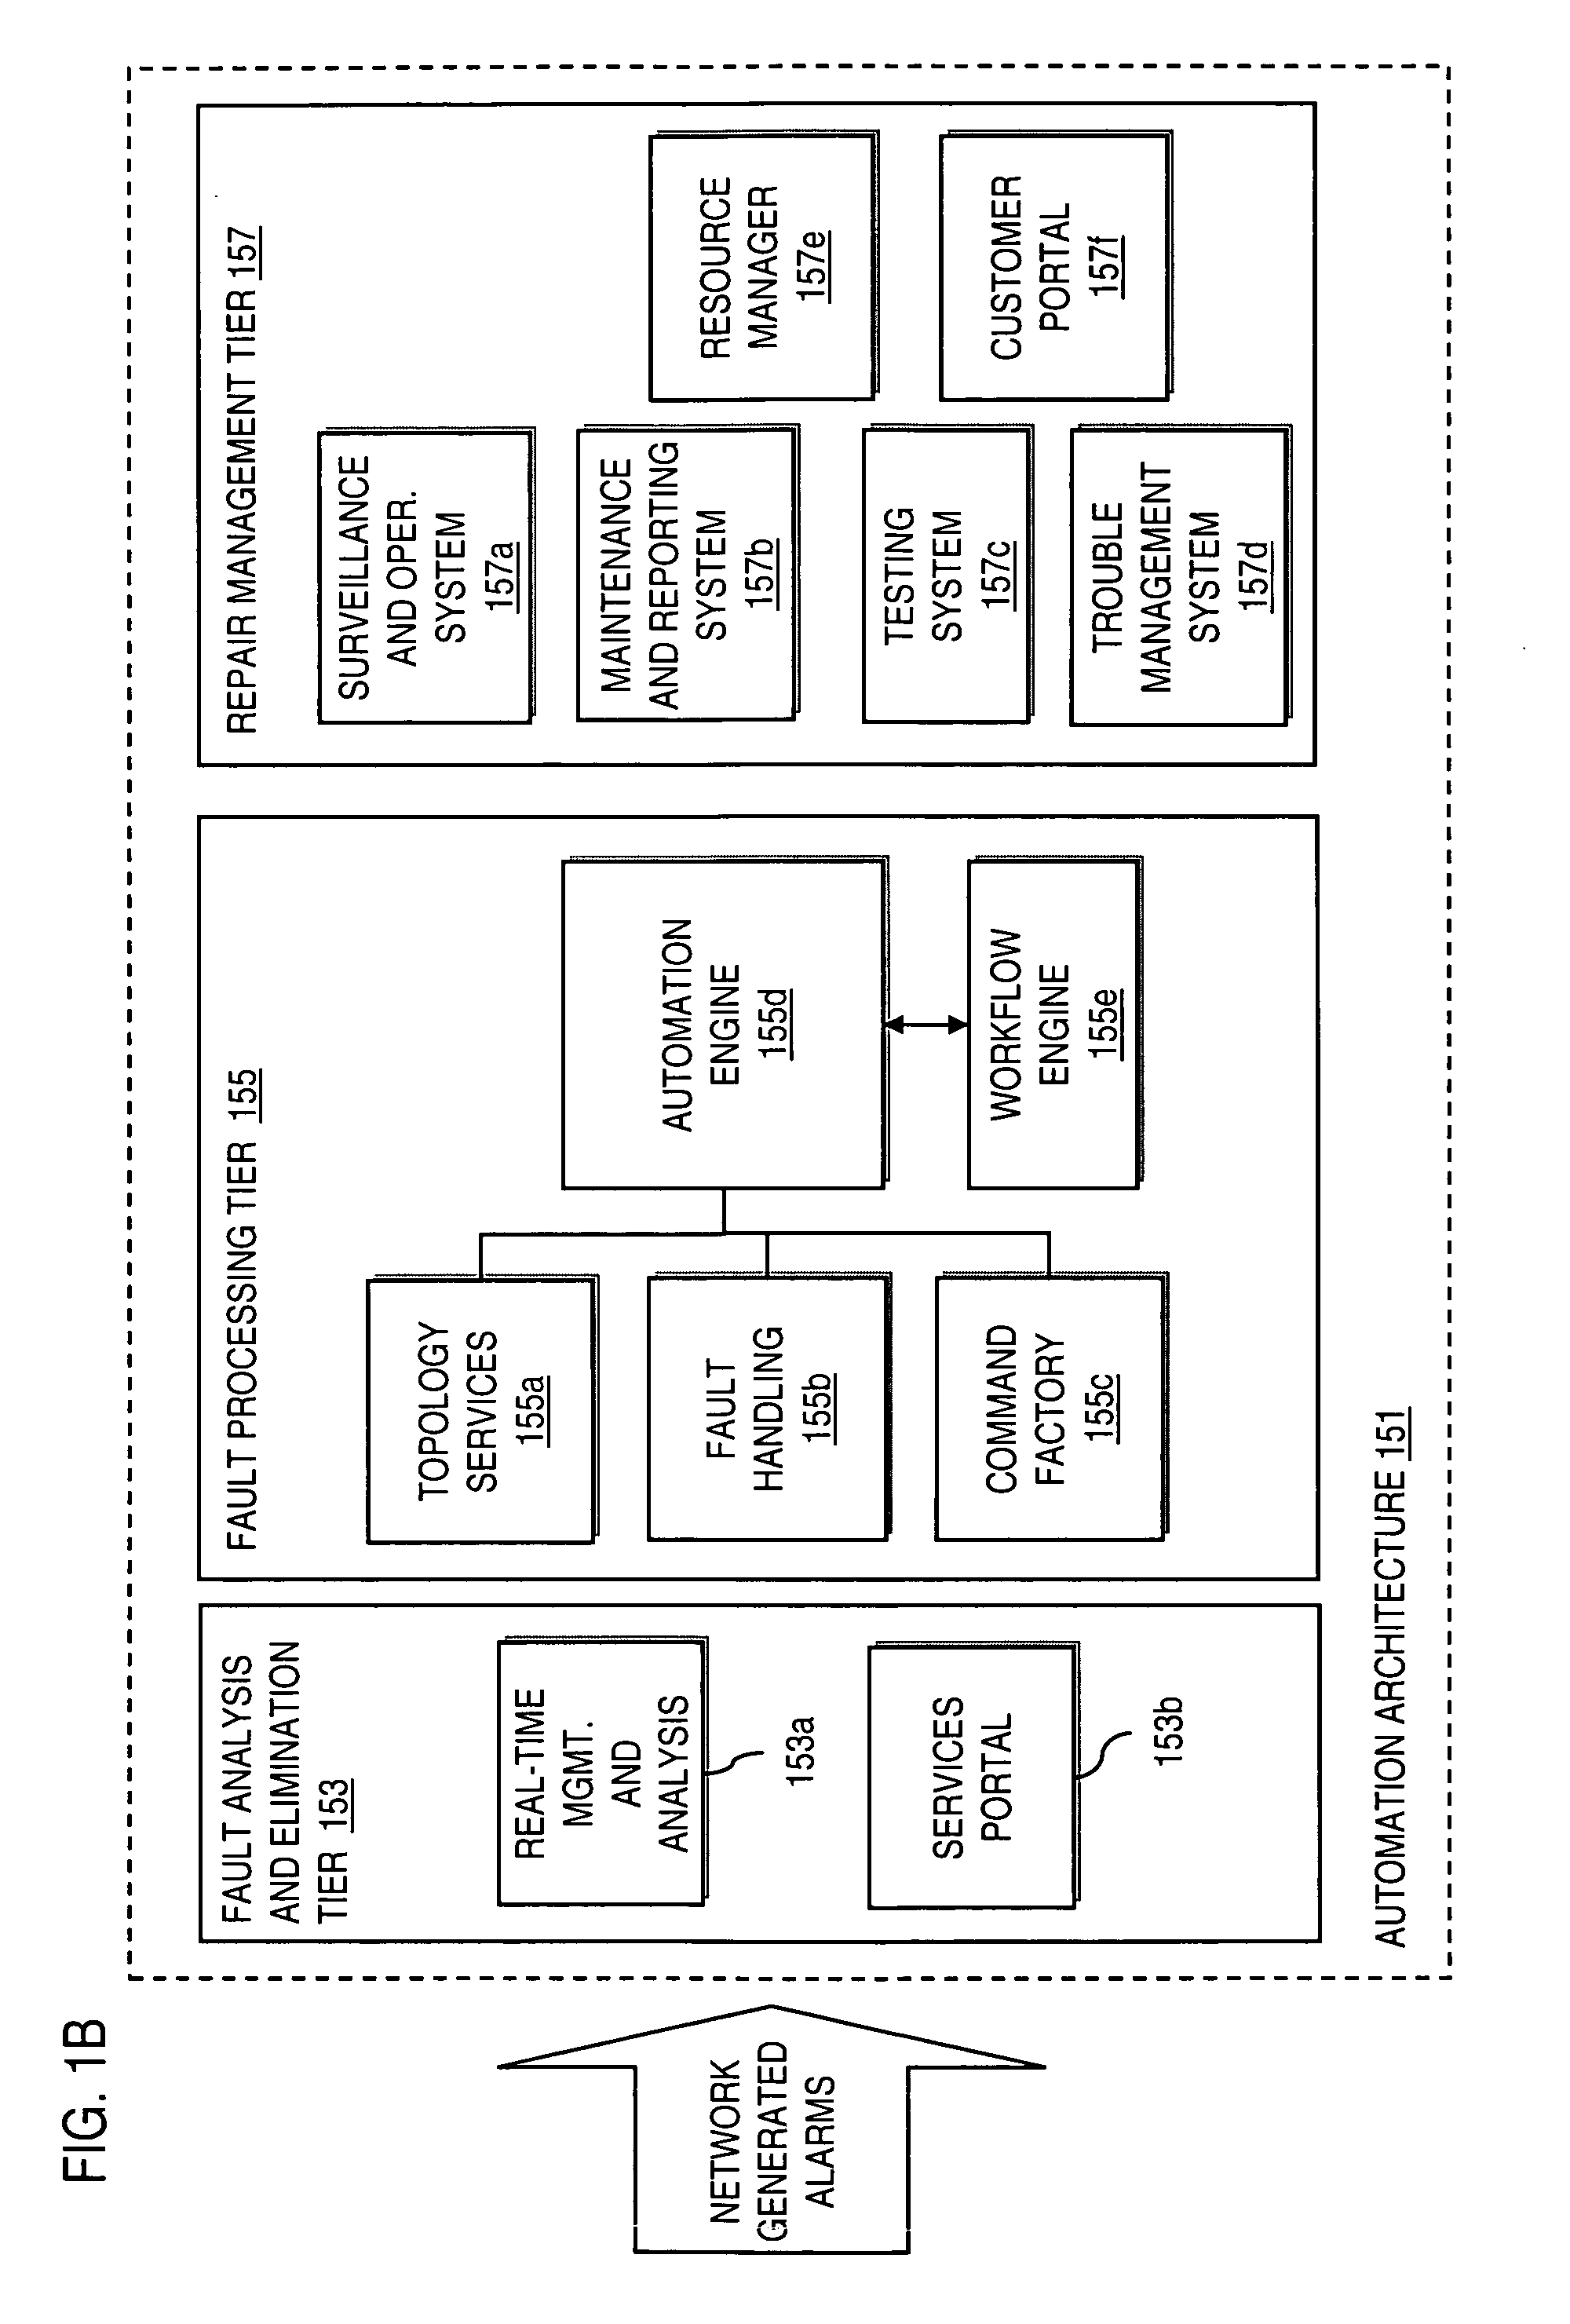 Method and system for processing fault alarms and trouble tickets in a managed network services system